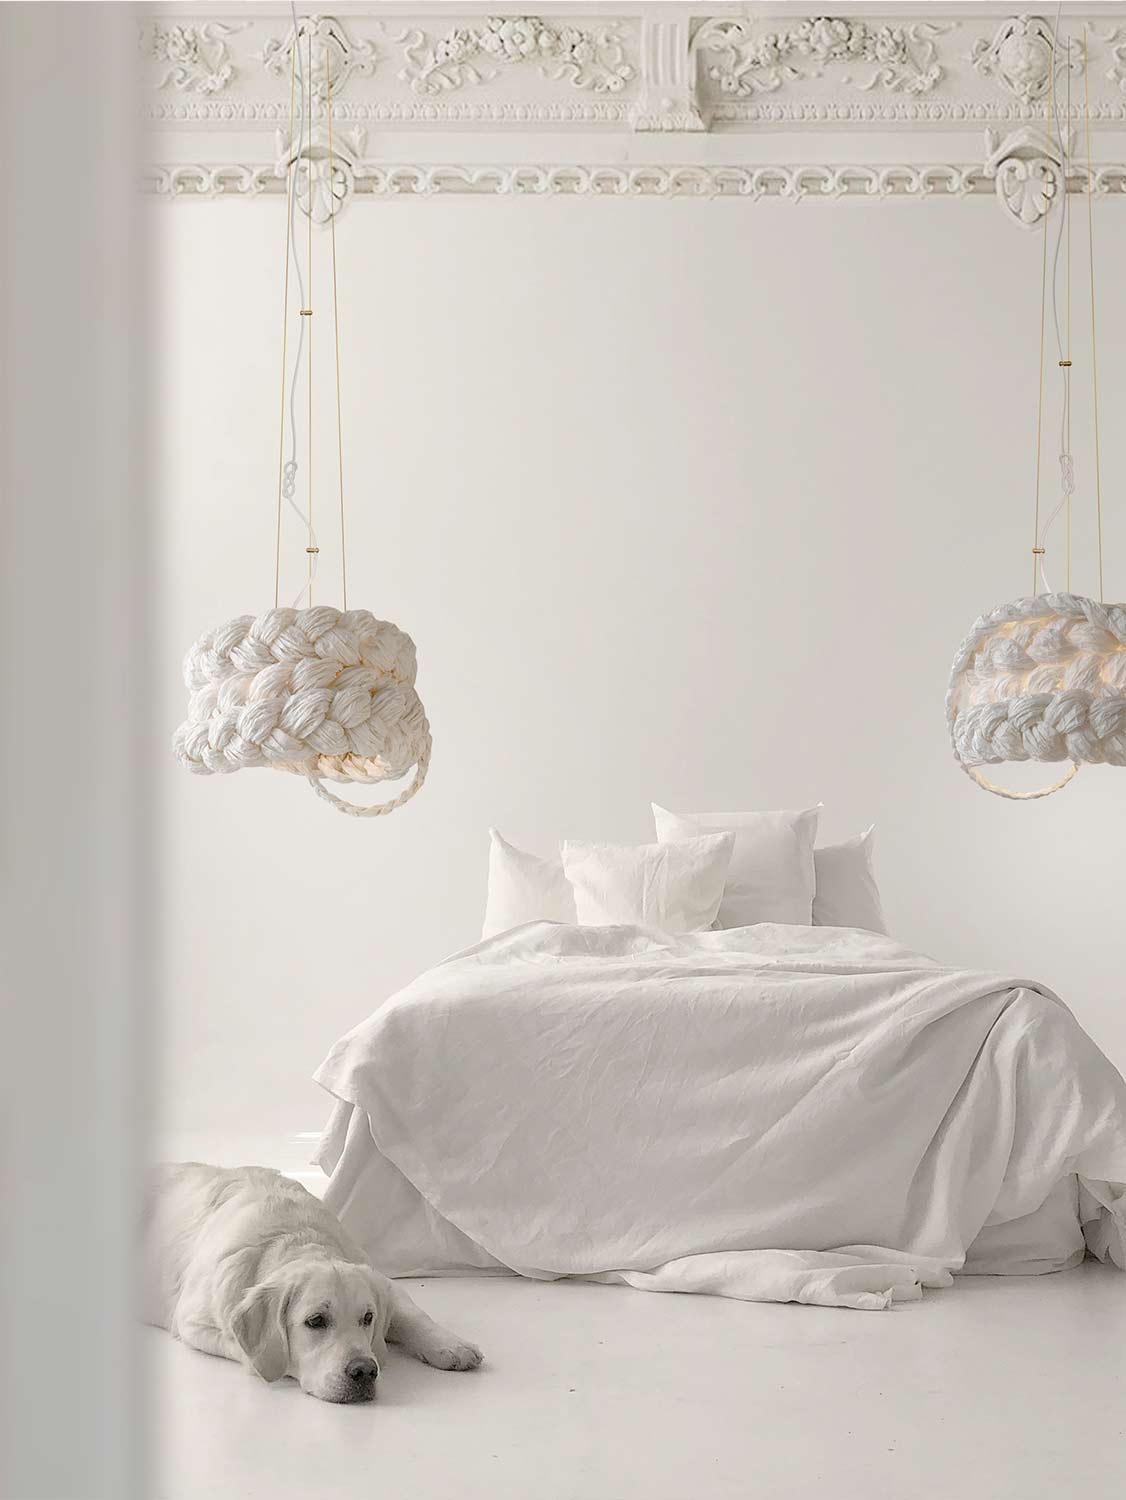 White Paper Braided Unique Handmade Pendant Lamp | Cozy Atmosphere Lighting | Contemporary Natural Lighting for Living room,  Bedroom & Lobby | Sustainable Design Lighting | baby & kids room lighting | White interior | mammalampa The Bride suspension lamp M